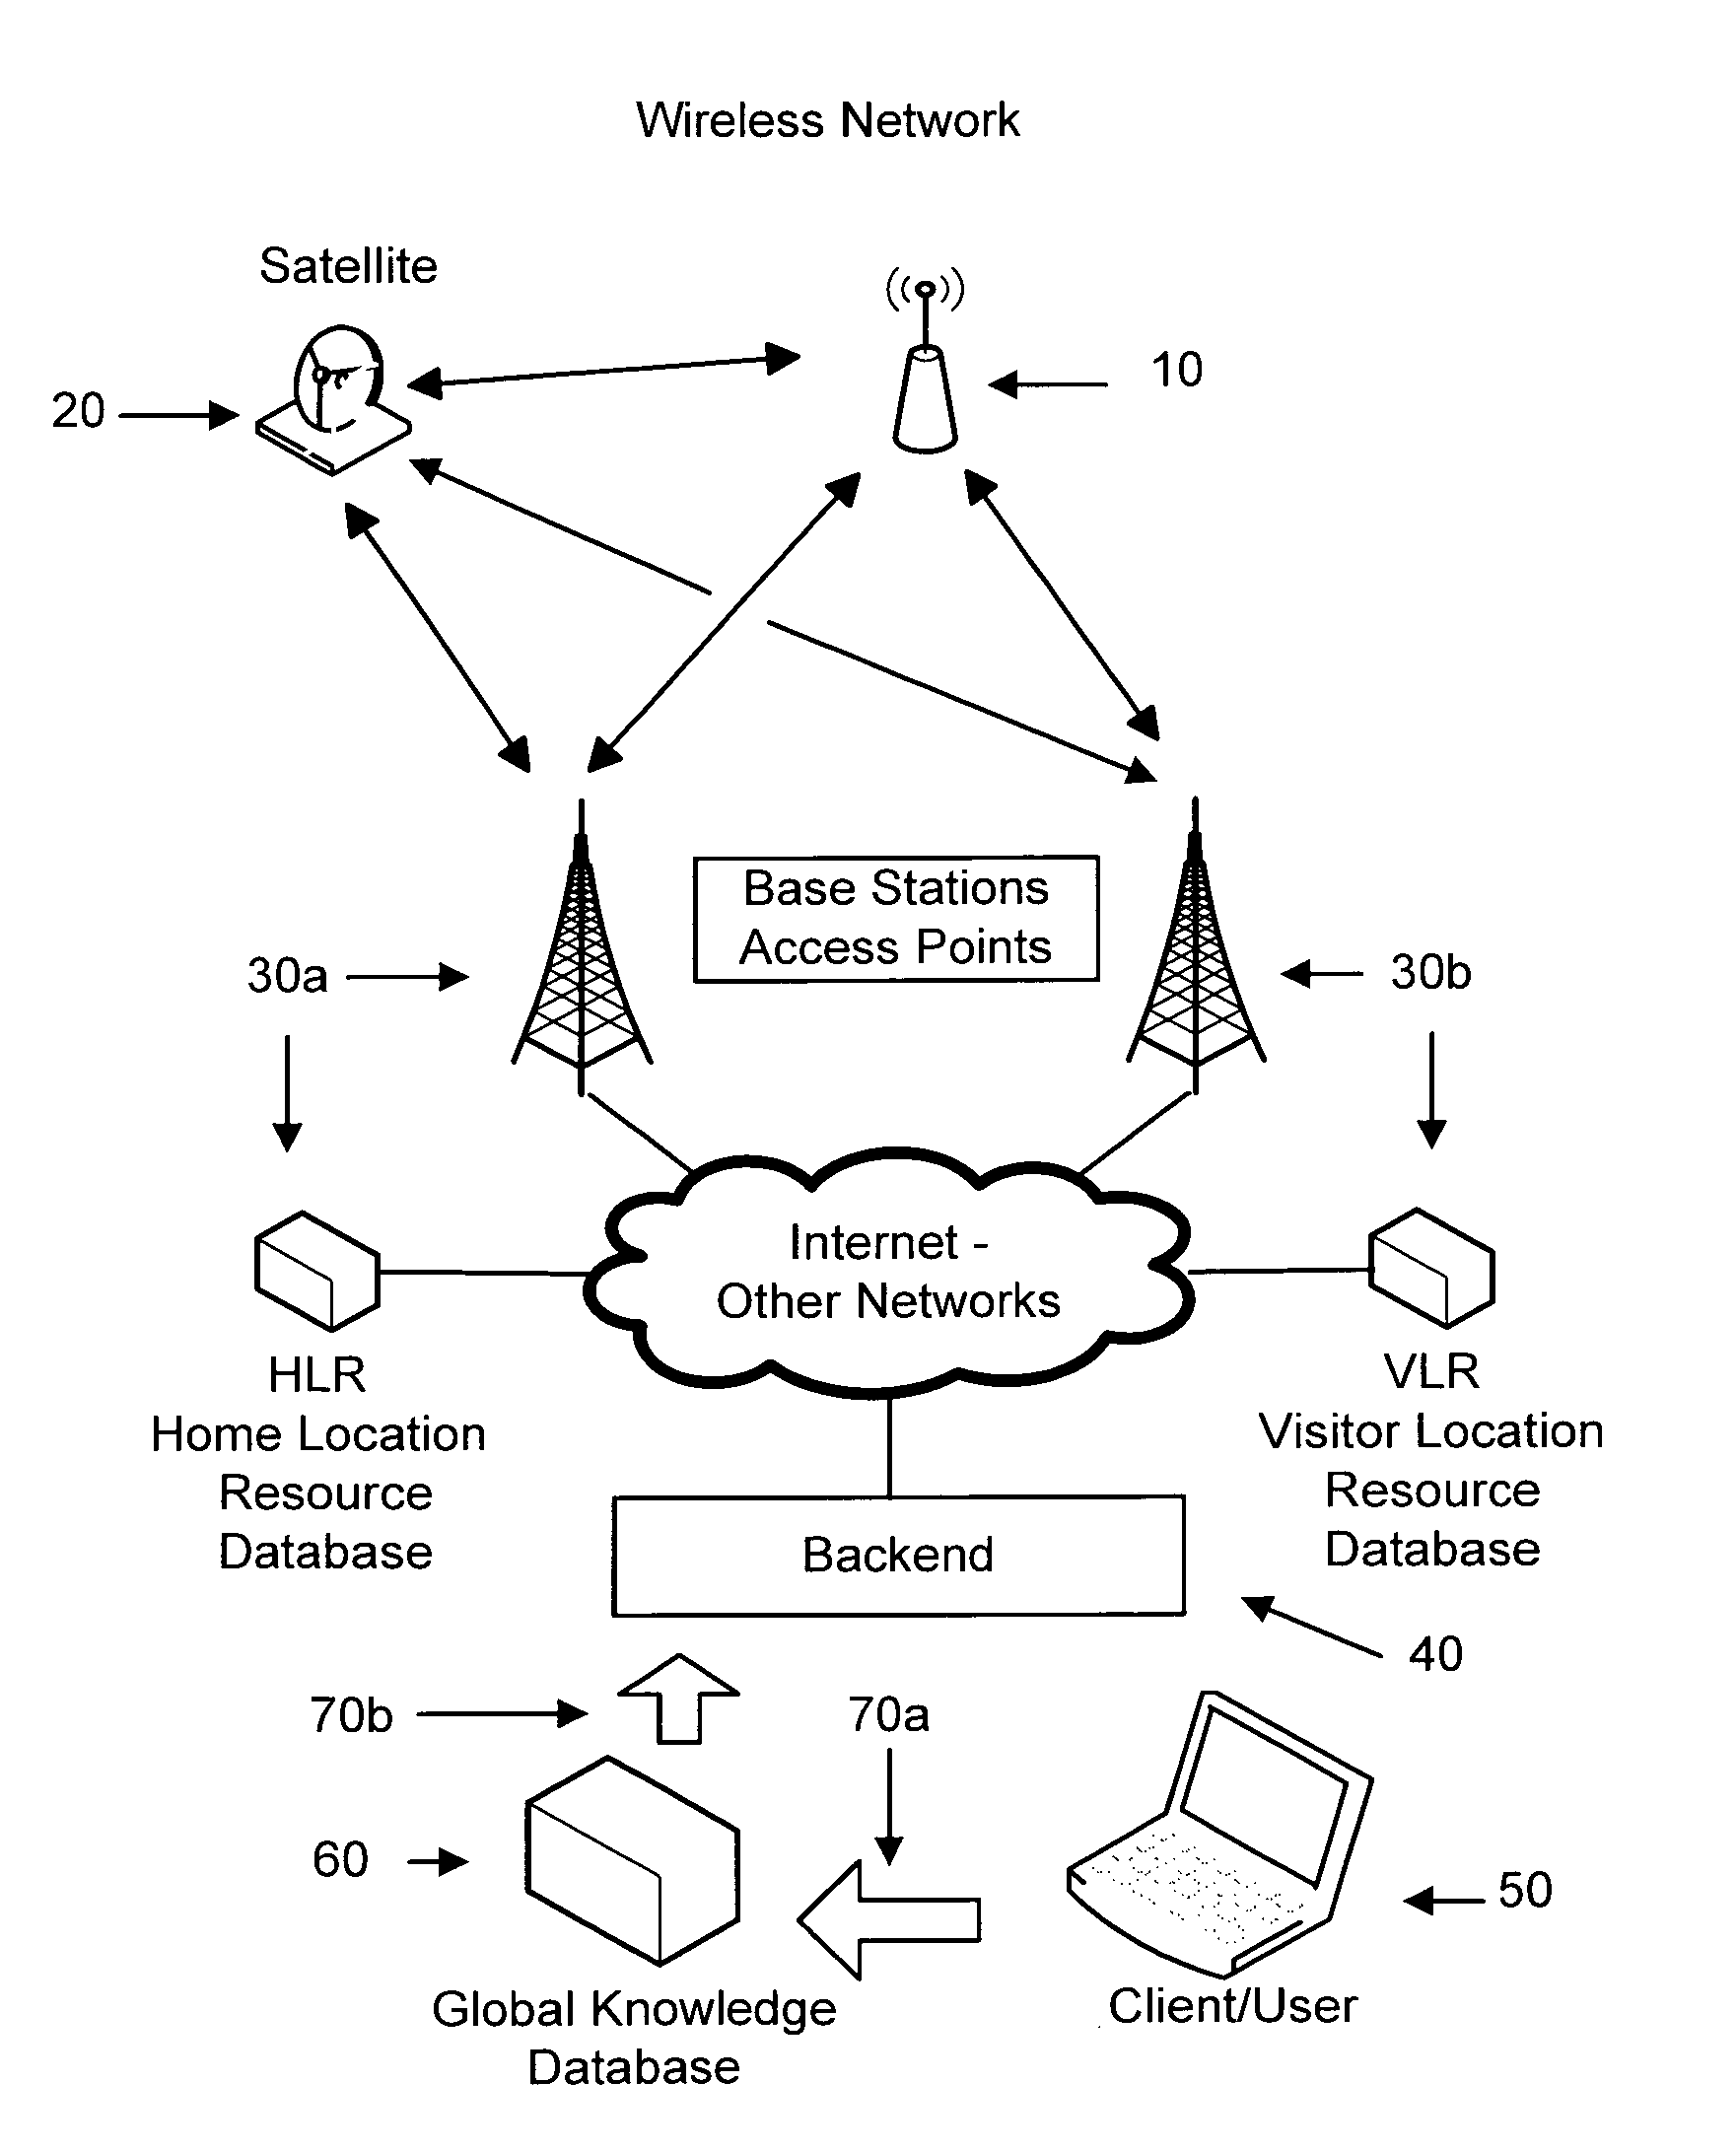 Passive mode tracking through existing and future wireless networks